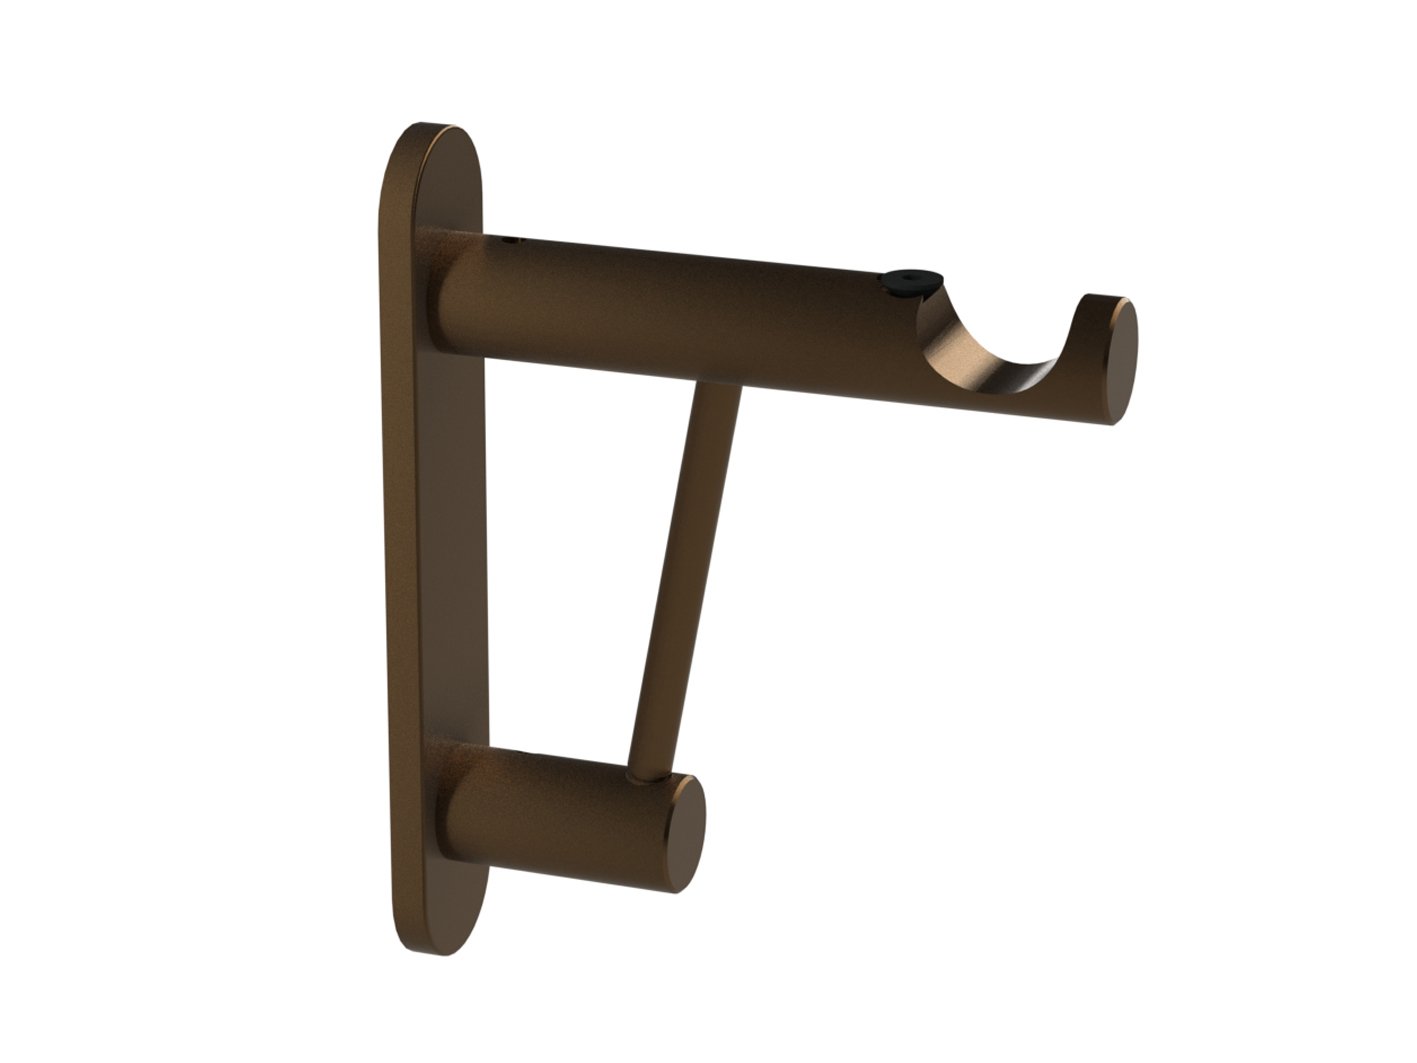 Architrave bracket for 19mm dia. curtain pole